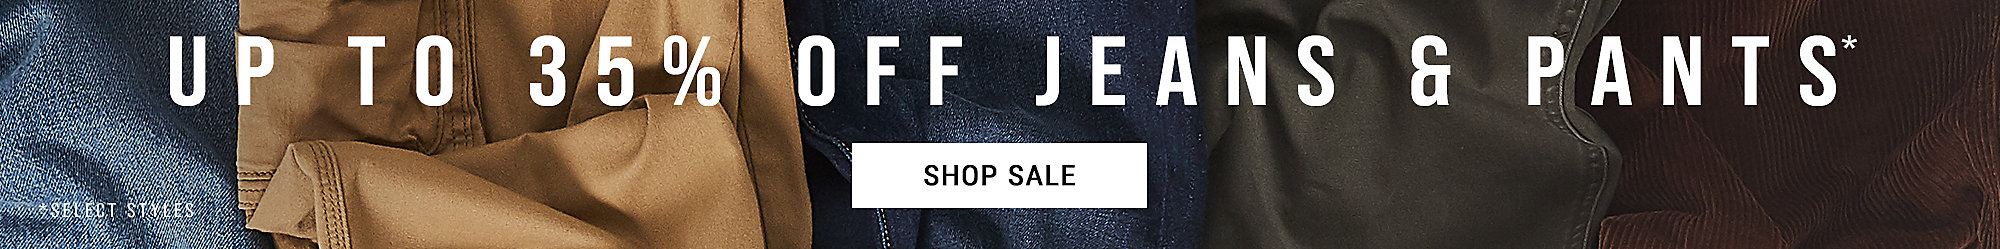 Up To 35% Off Jeans & Pants*